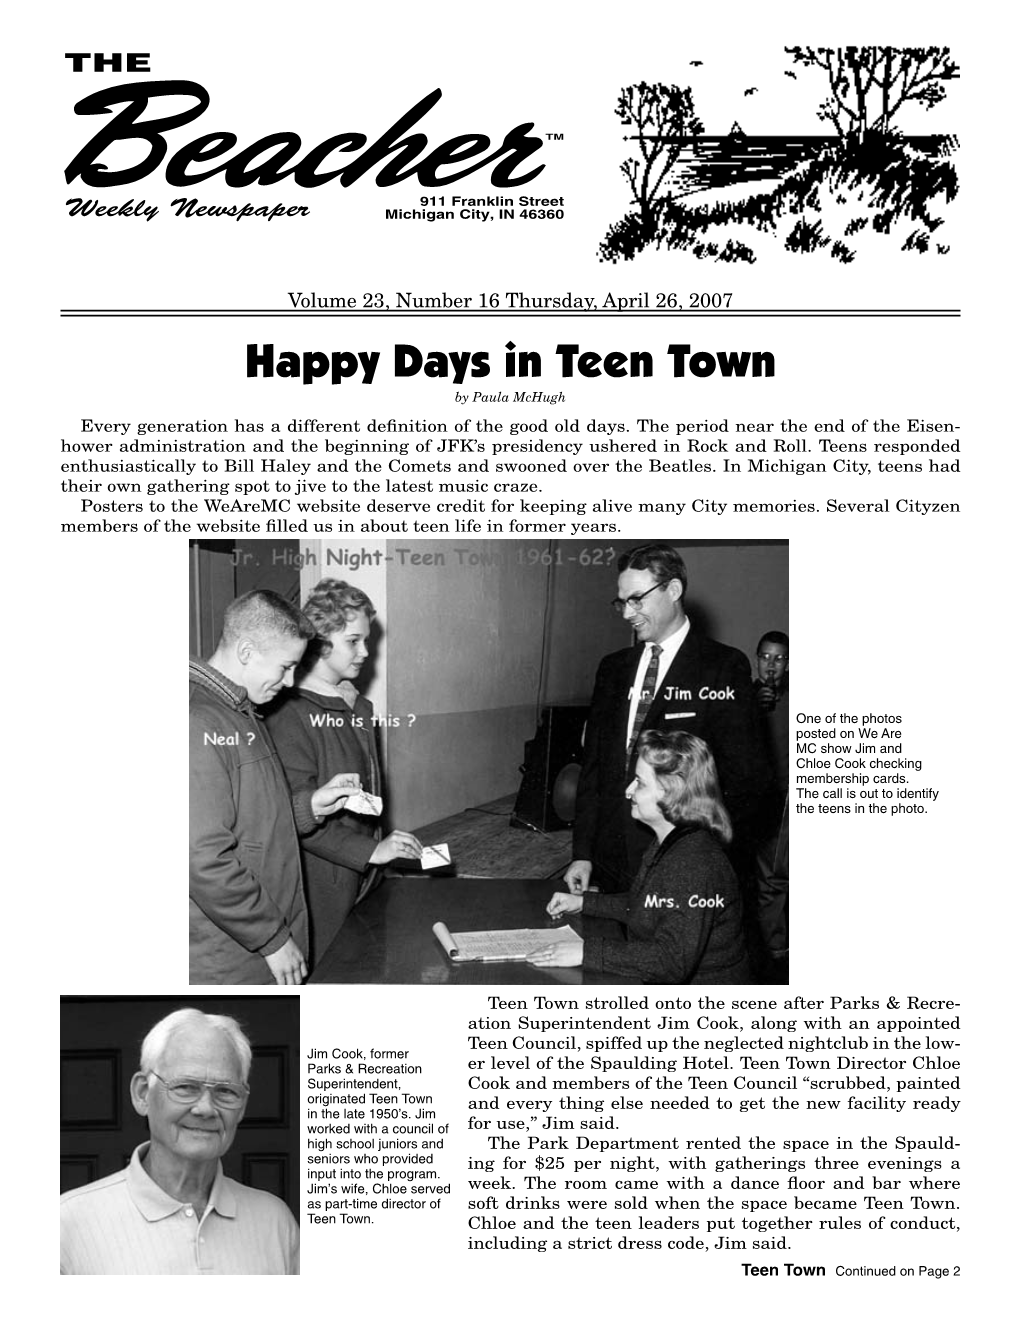 Happy Days in Teen Town by Paula Mchugh Every Generation Has a Different Deﬁ Nition of the Good Old Days